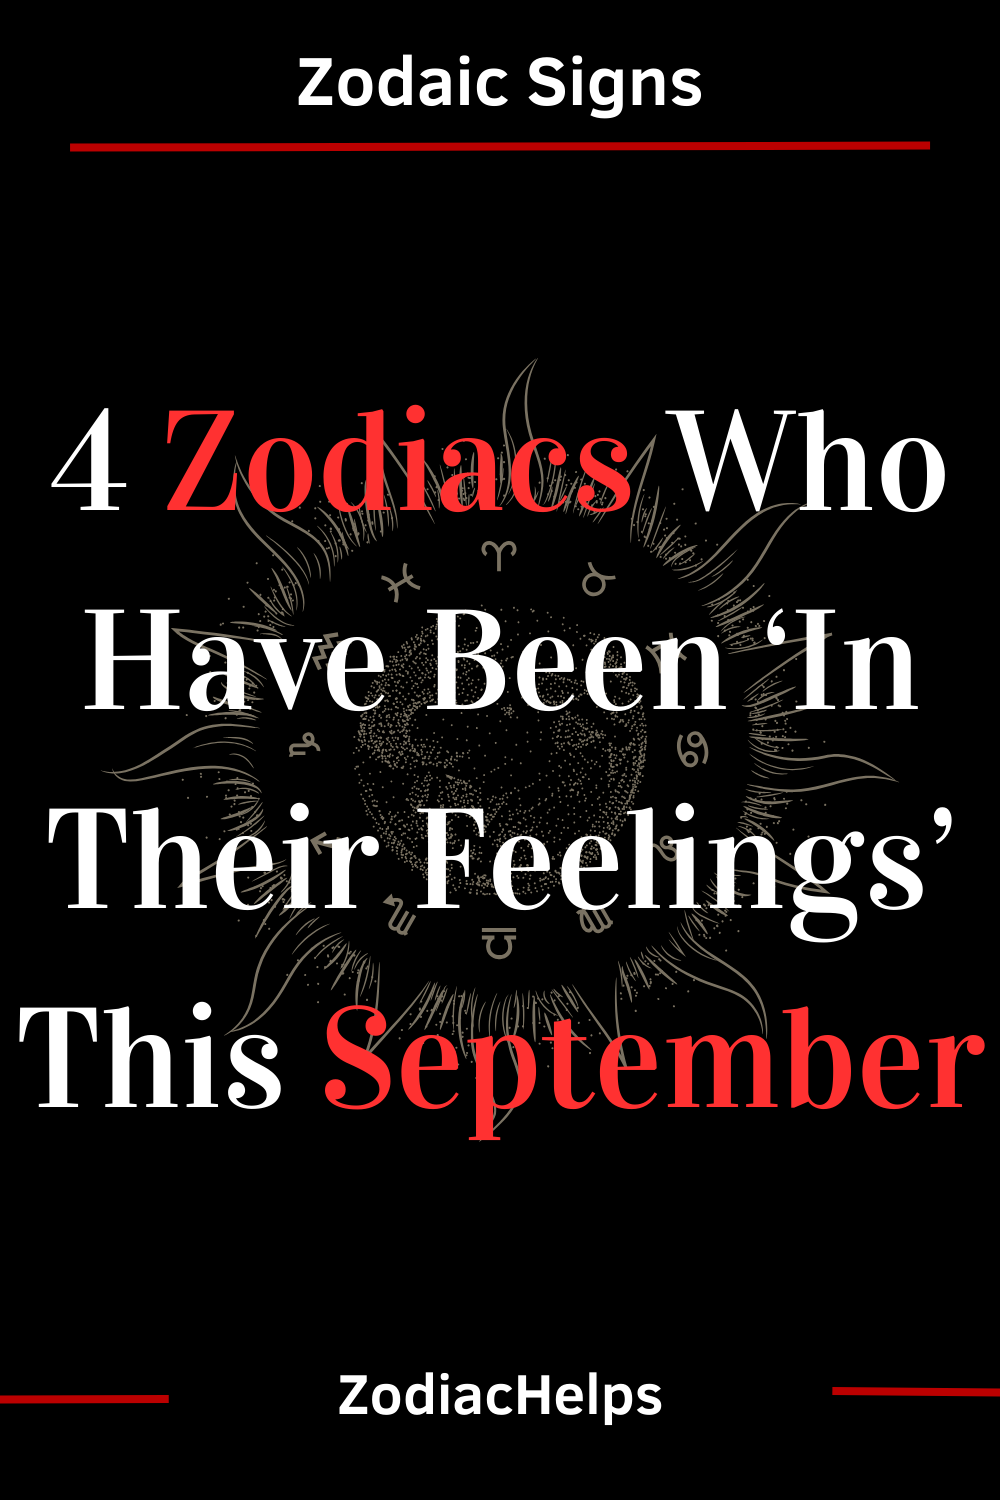 4 Zodiacs Who Have Been ‘In Their Feelings’ This September